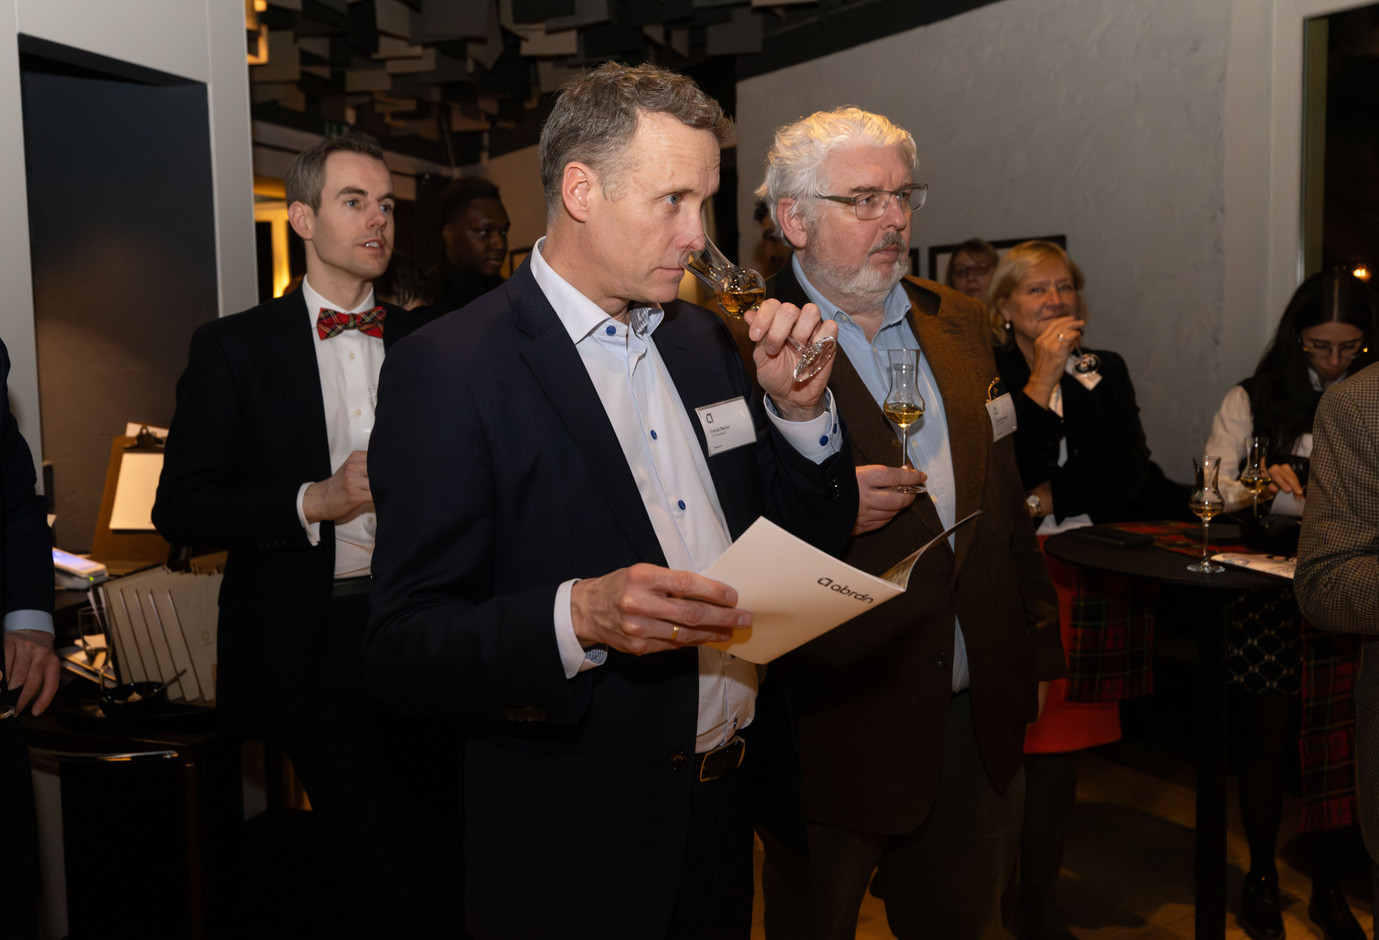 Francois-Xavier Diricks (Abrdn), Patrick Becker (CA Indosuez) and Peter Duynslaeger (CA Indosuez) listen to whisky expert Stuart Cassells explain how to identify the aromas and flavours when whisky tasting. Photo: Guy Wolff/Maison Moderne